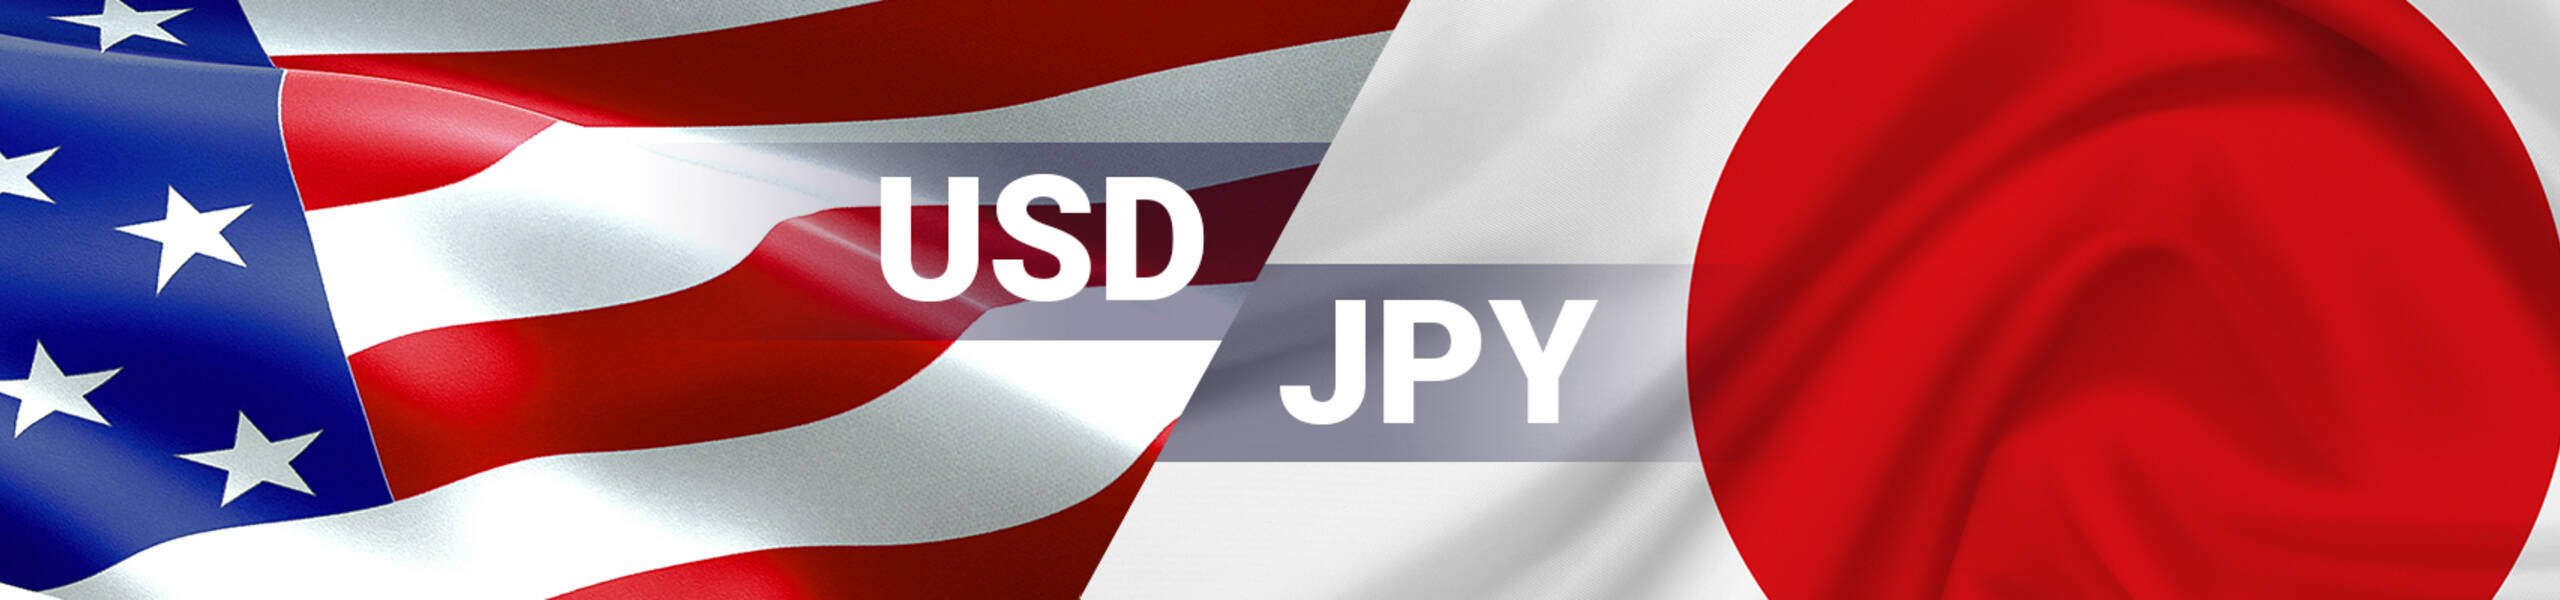 FX:為替 USD/JPY Dailyレポート 2017/07/27